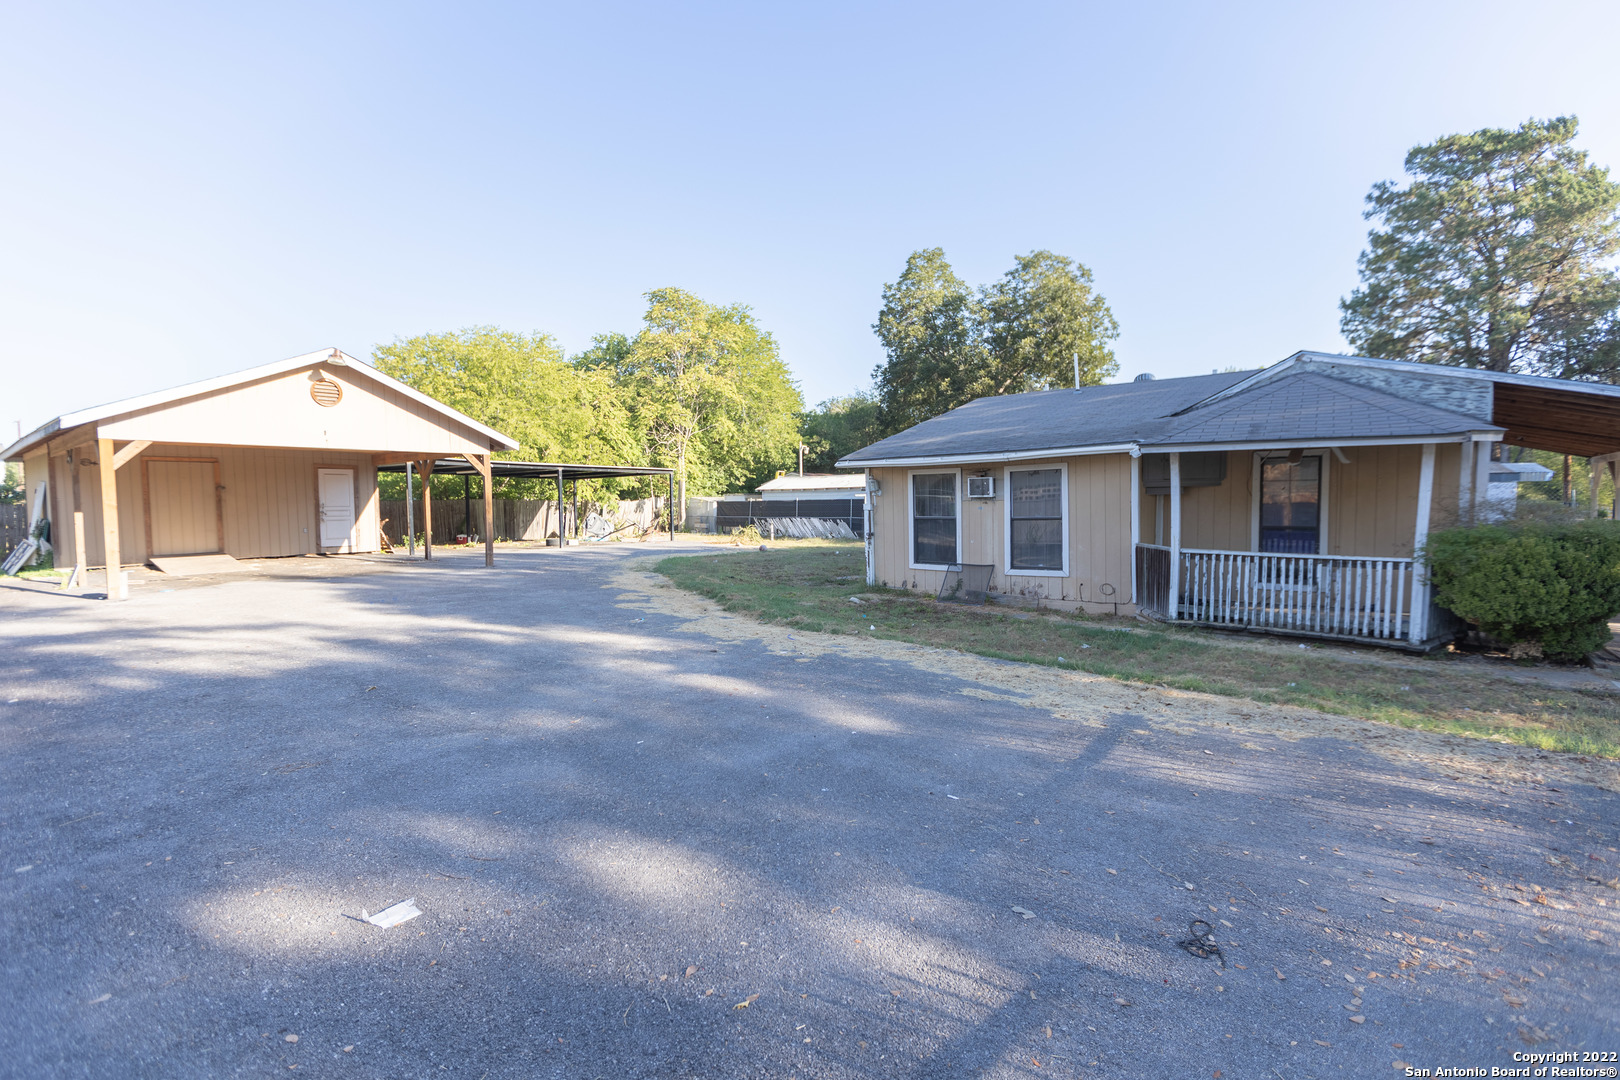 Historic gem can be yours with an incredible lot size! Home is fixated on 2 combined lots on just under a quarter of an acre. The perfect project to invest in and make your own! Please reach out with any questions we can answer for you!